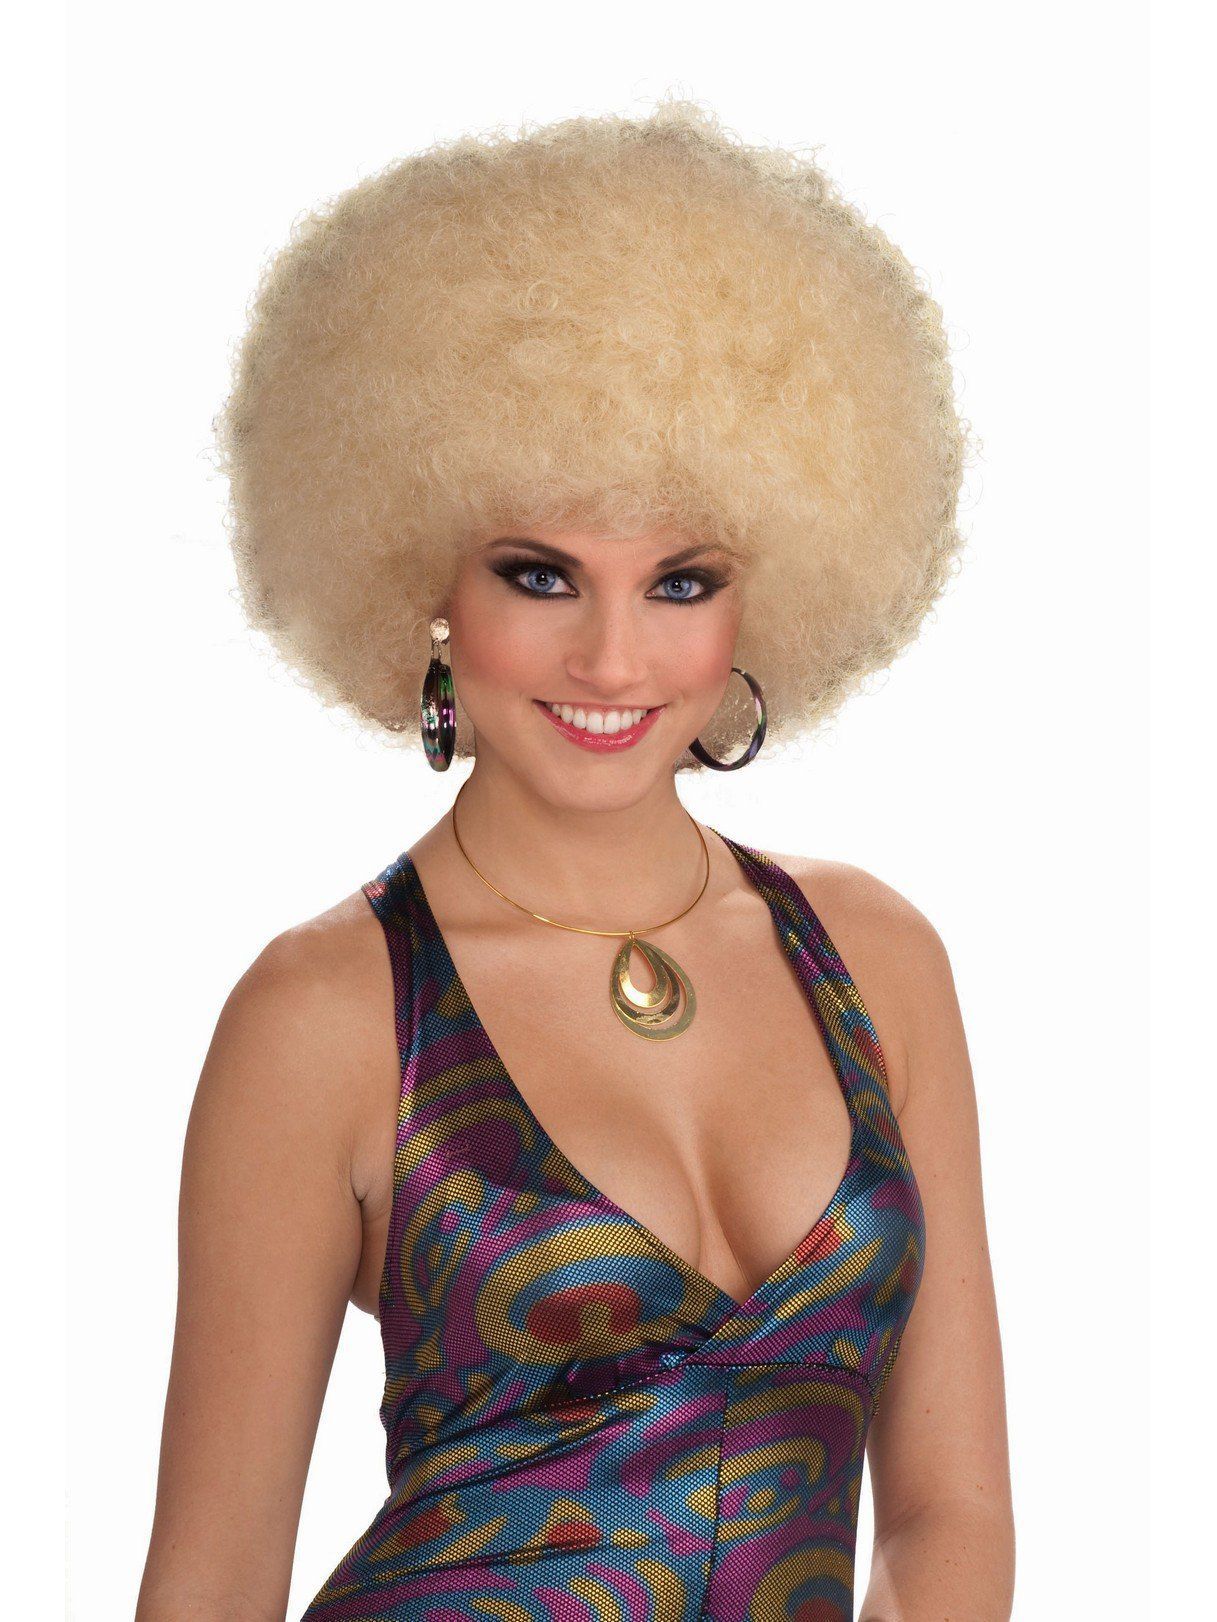 Adult Blonde Curly Party Wig - Deluxe - costumes.com